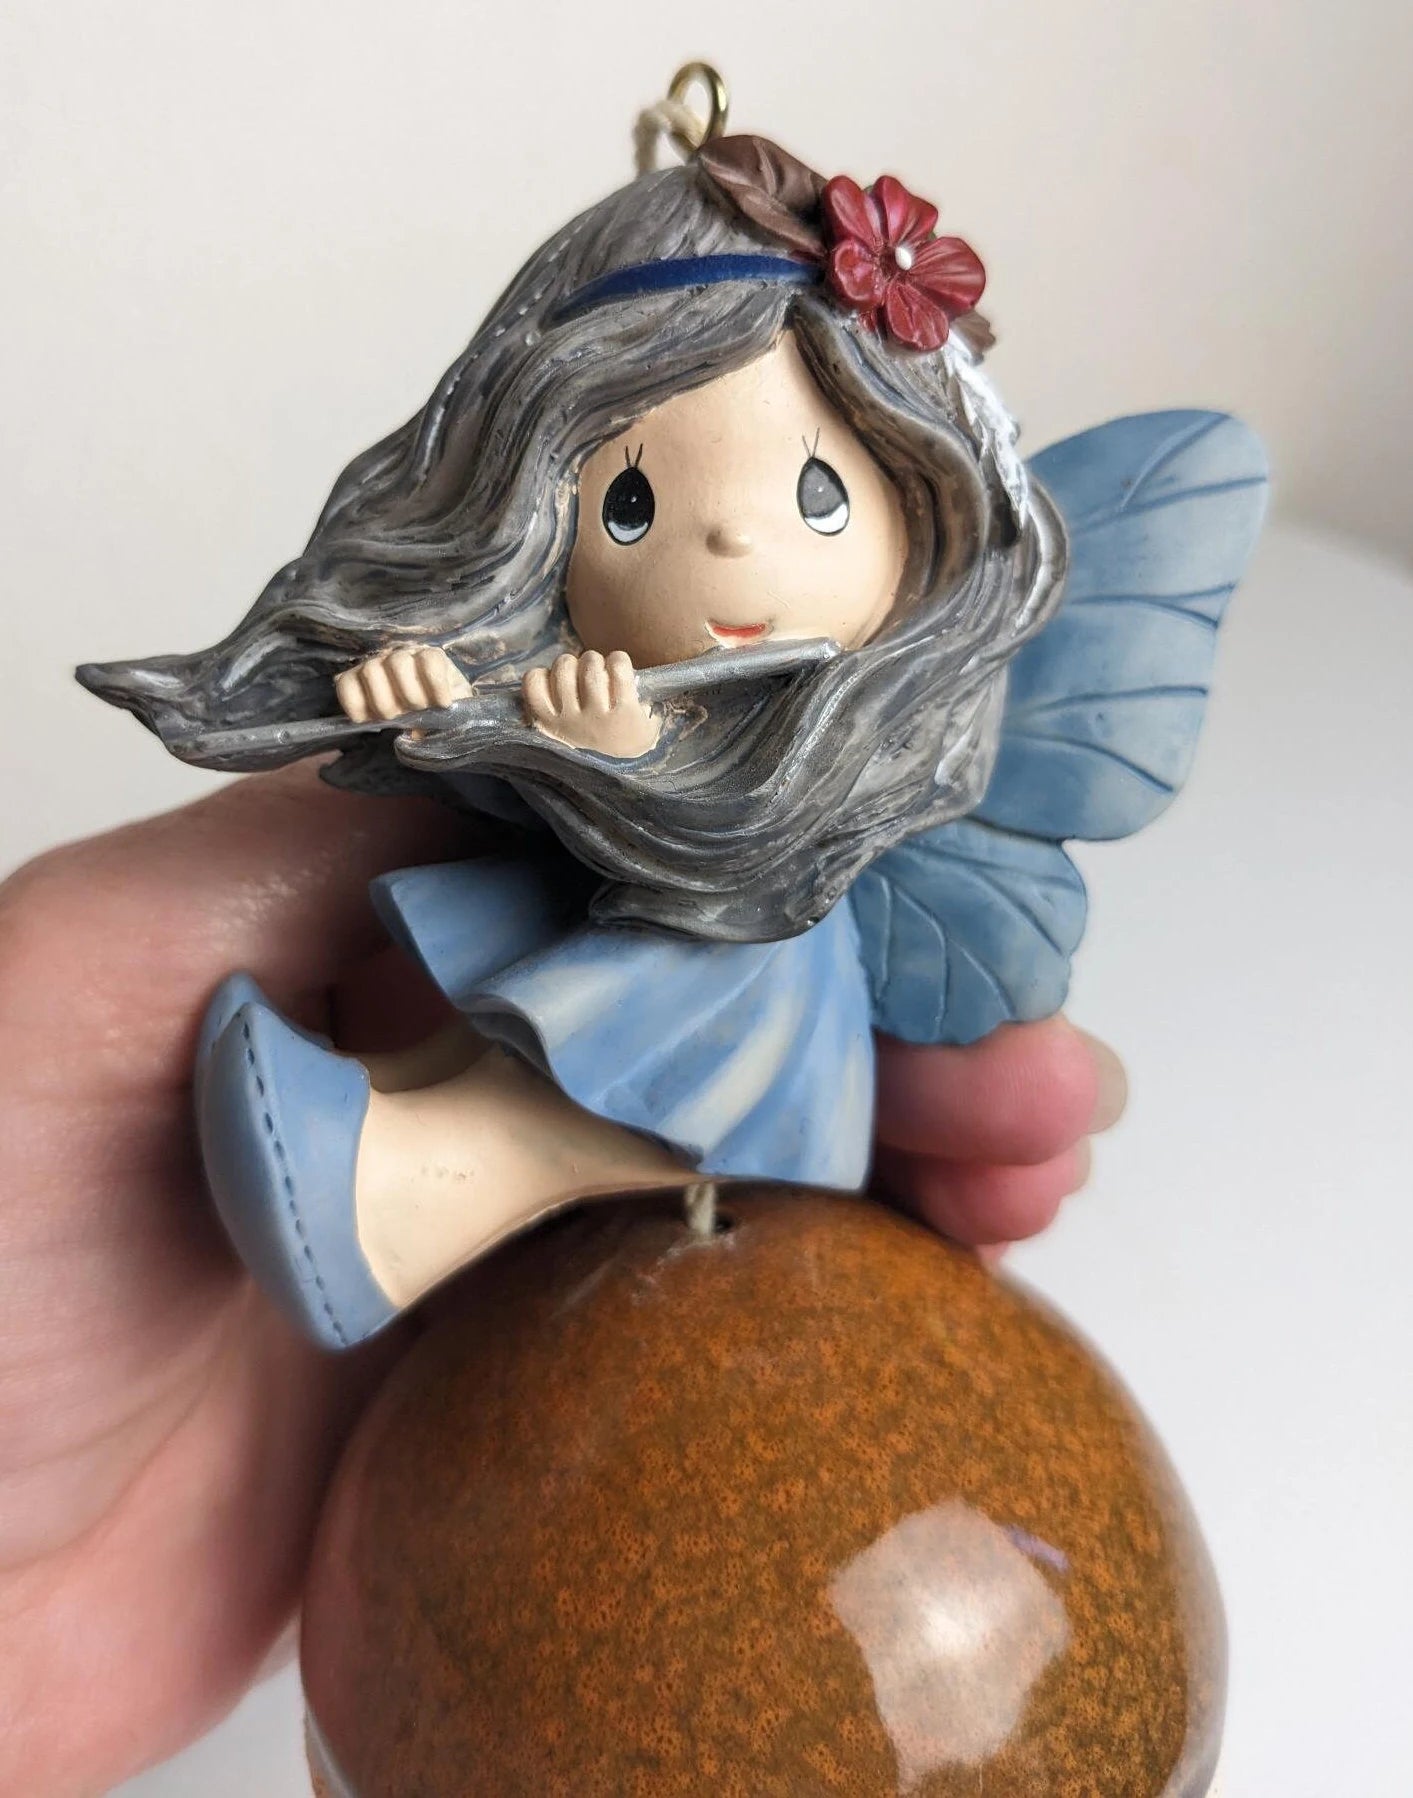 Precious Moments Forest Fairy on Mushroom Bell Ornament